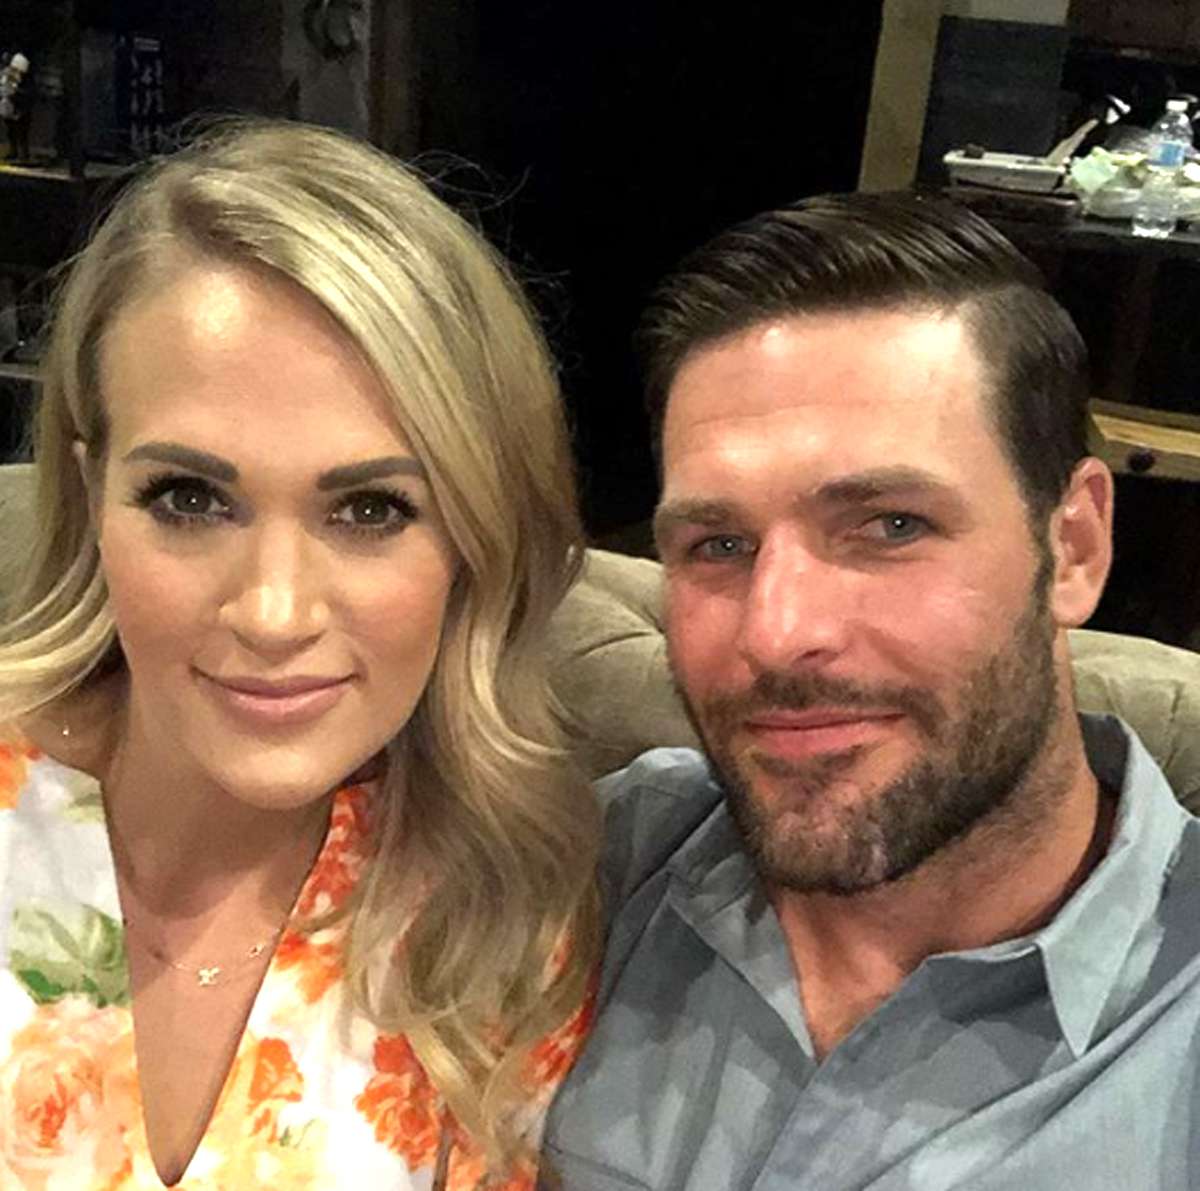 Carrie Underwood's Husband Mike Fisher Celebrates Their